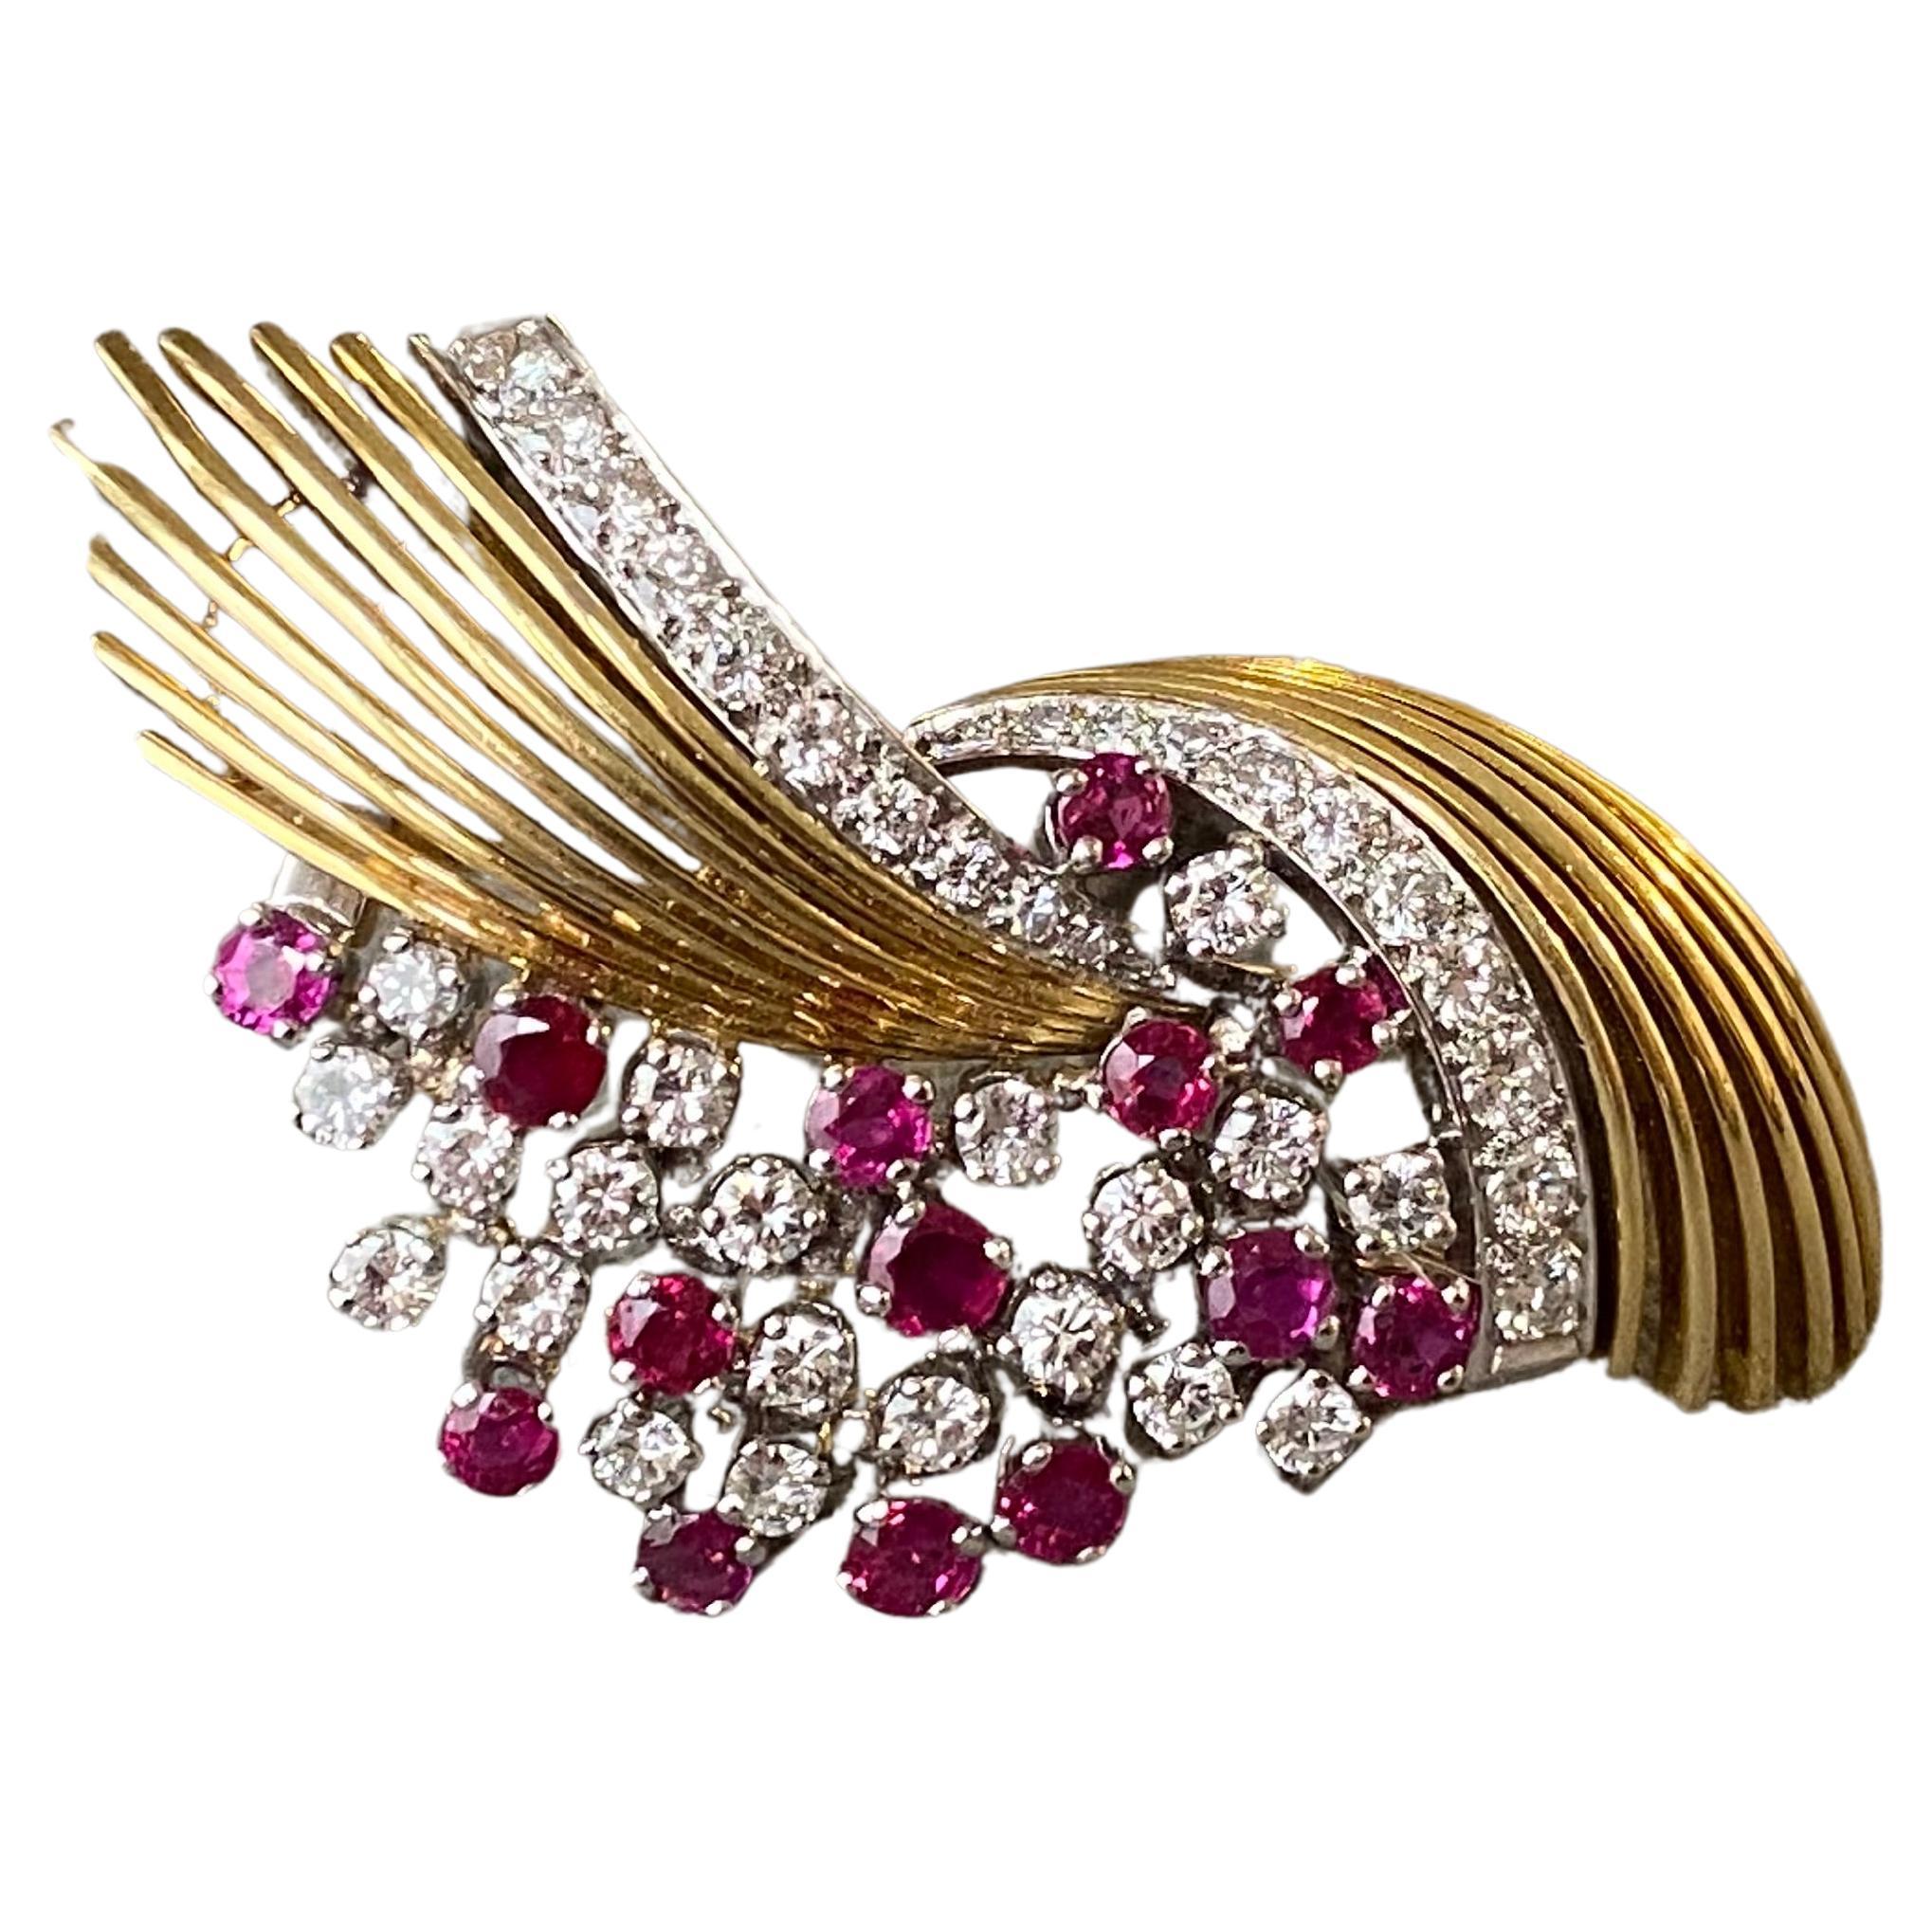 Vintage Ruby, Diamond and Gold Brooch, ca 1950